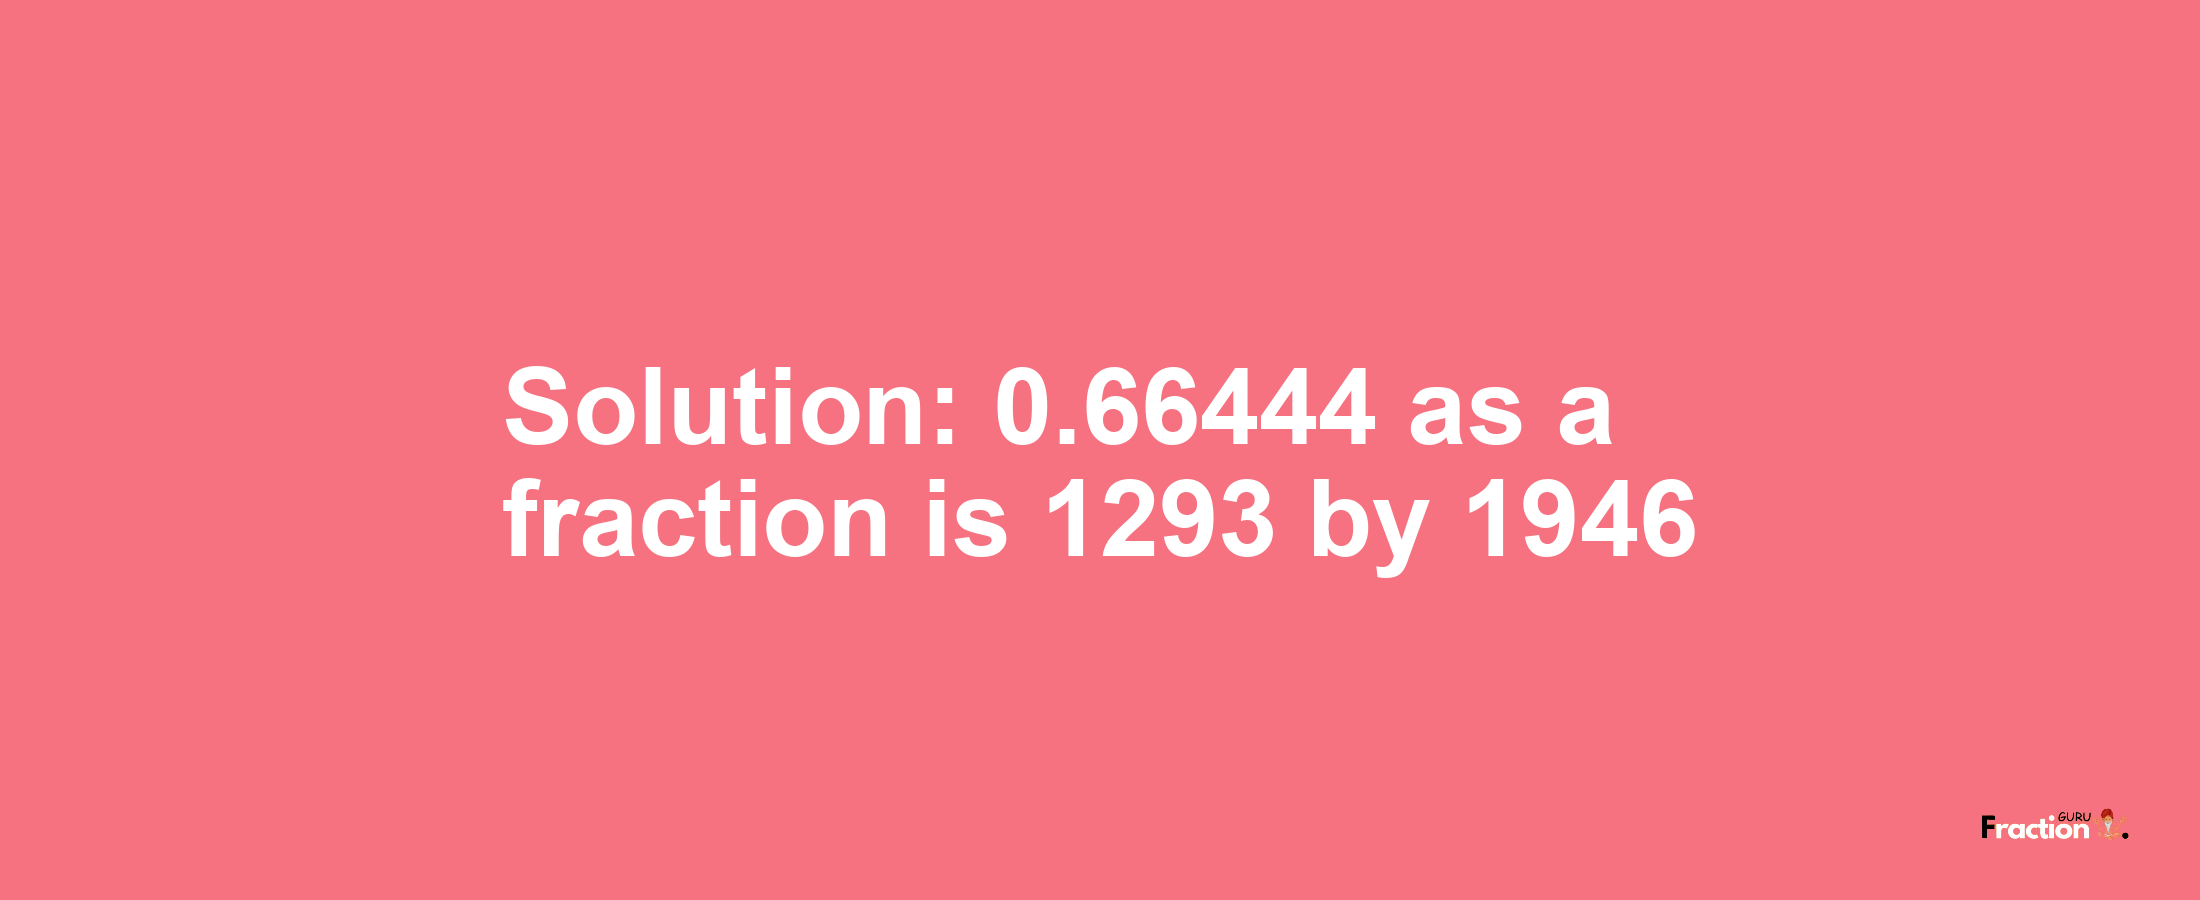 Solution:0.66444 as a fraction is 1293/1946